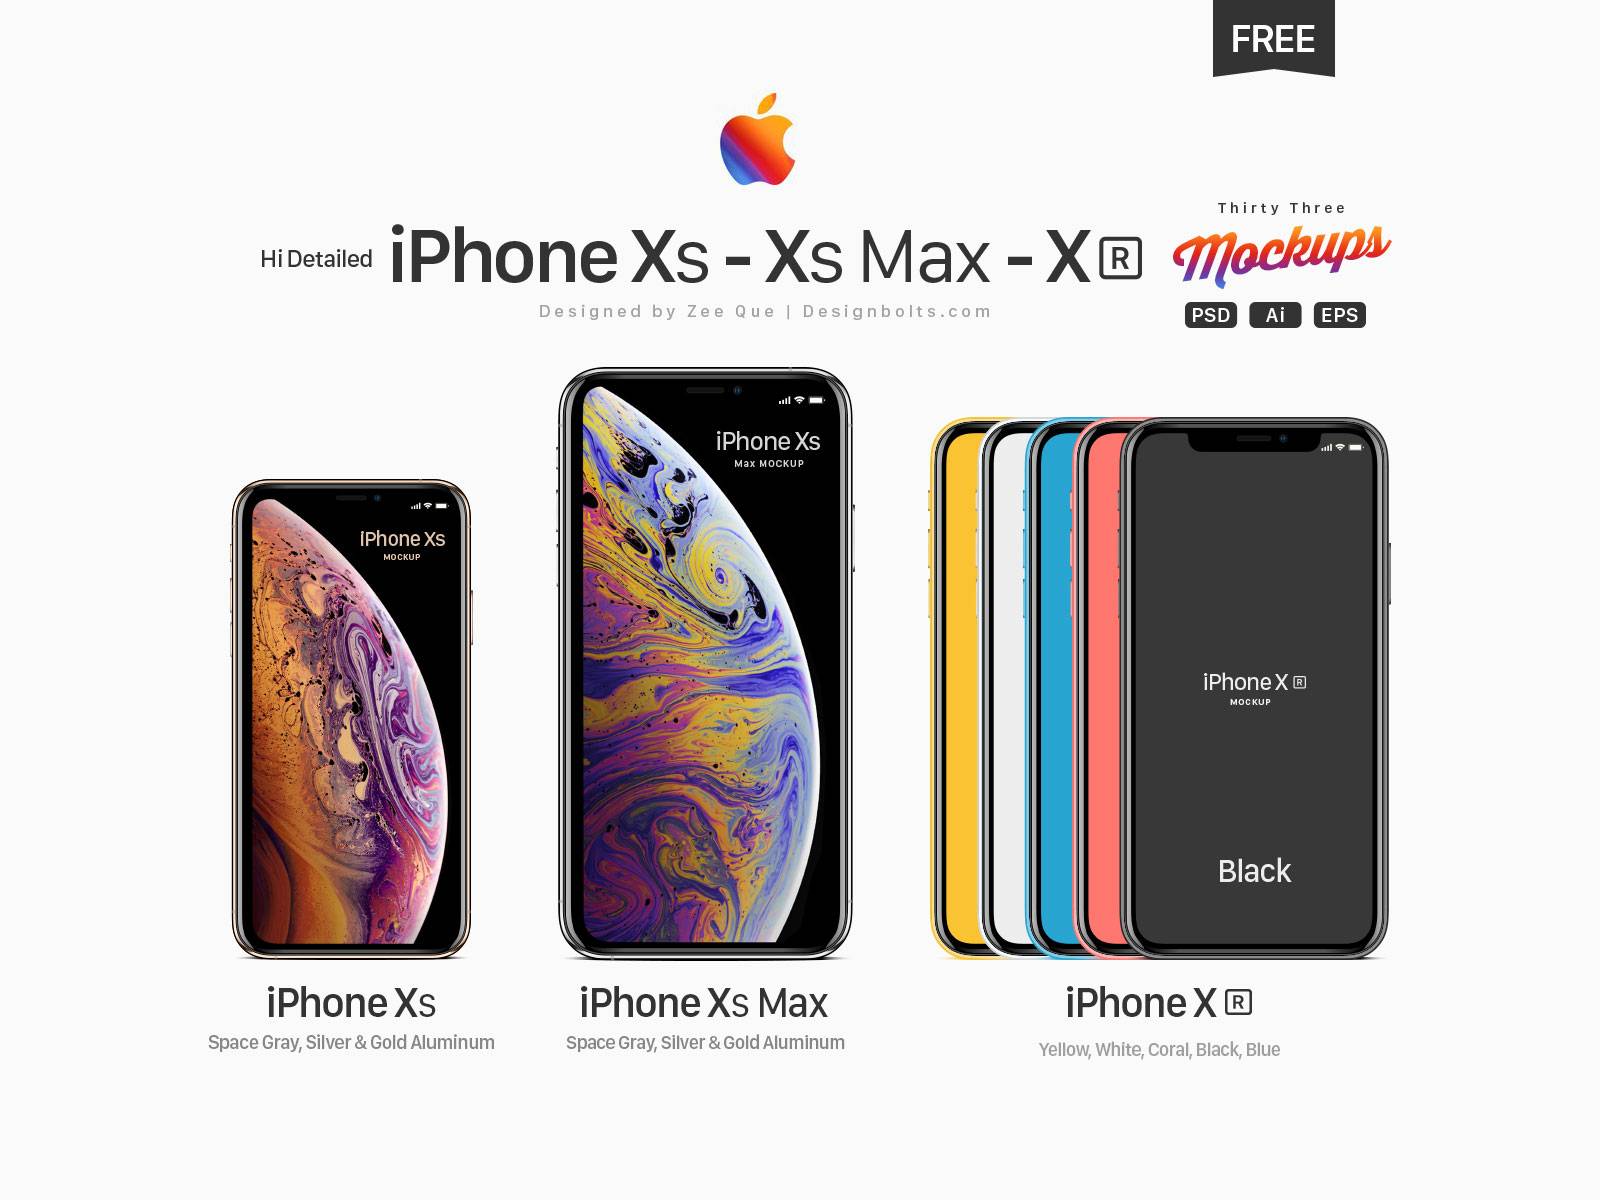 Download Apple iPhone Xs, Xs Max & Xr mockup样机素材 .psd .ai .eps素材下载-UI社 PSD Mockup Templates